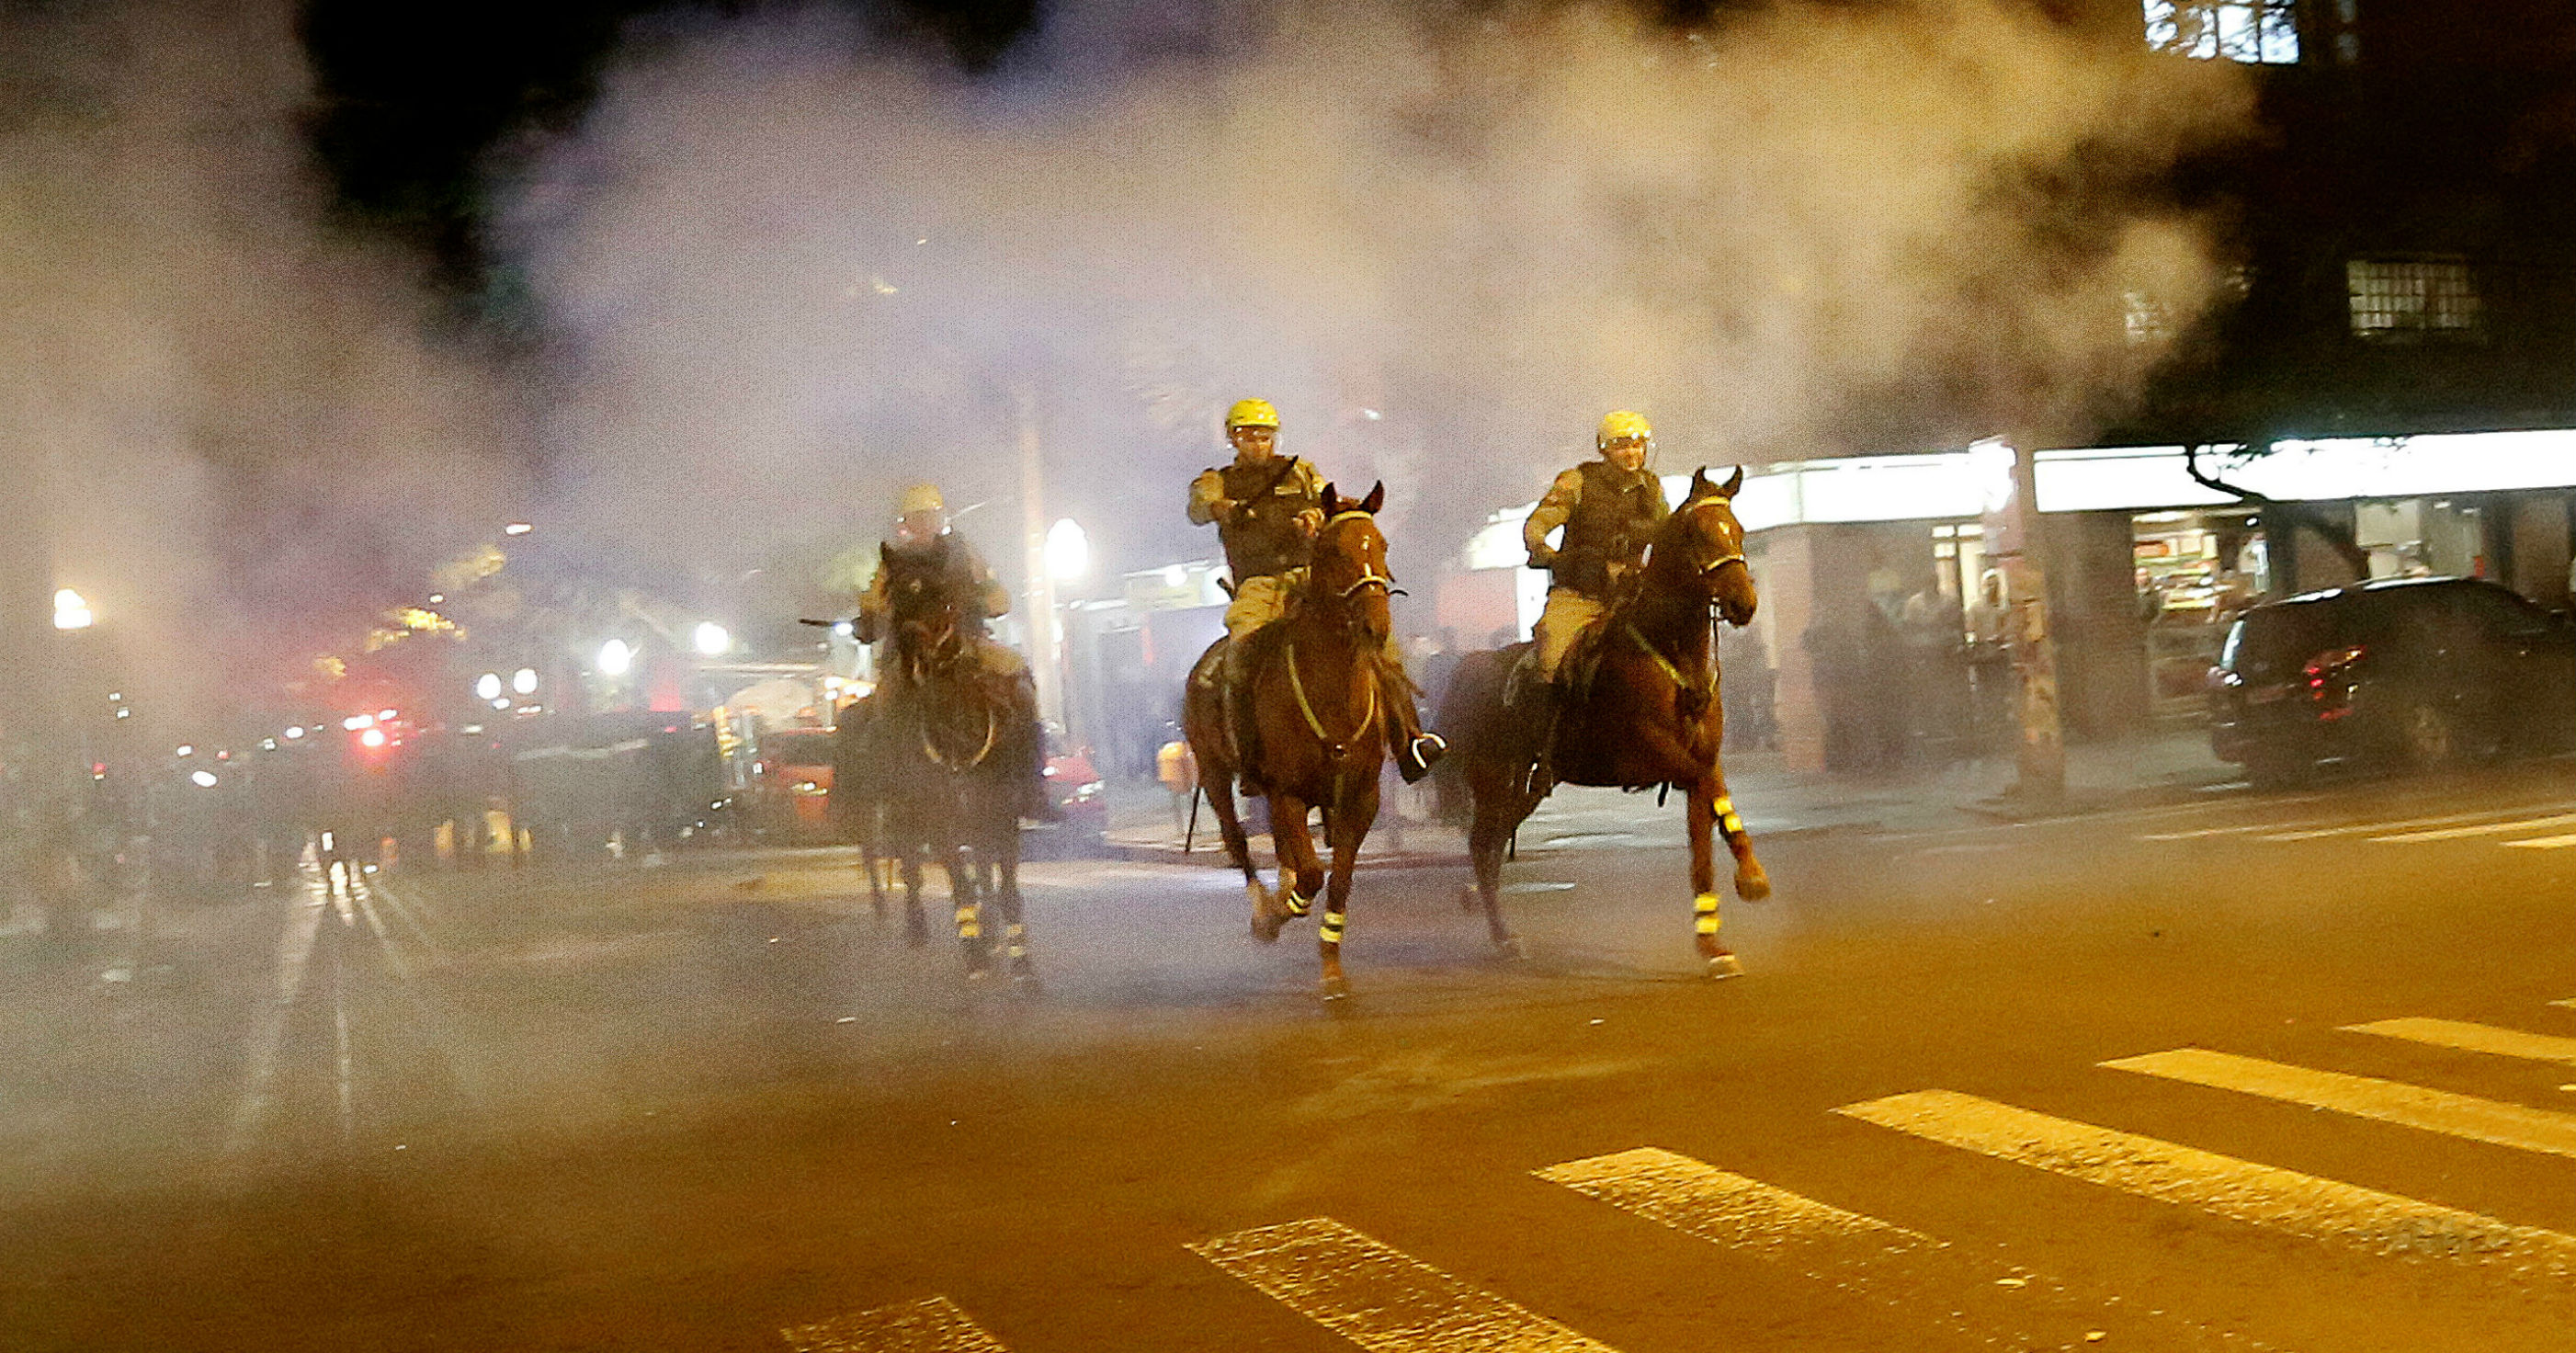 Policemen ride their horses during a clash with demonstrators at a protest against the impeachment of President Rousseff in Porto Alegre